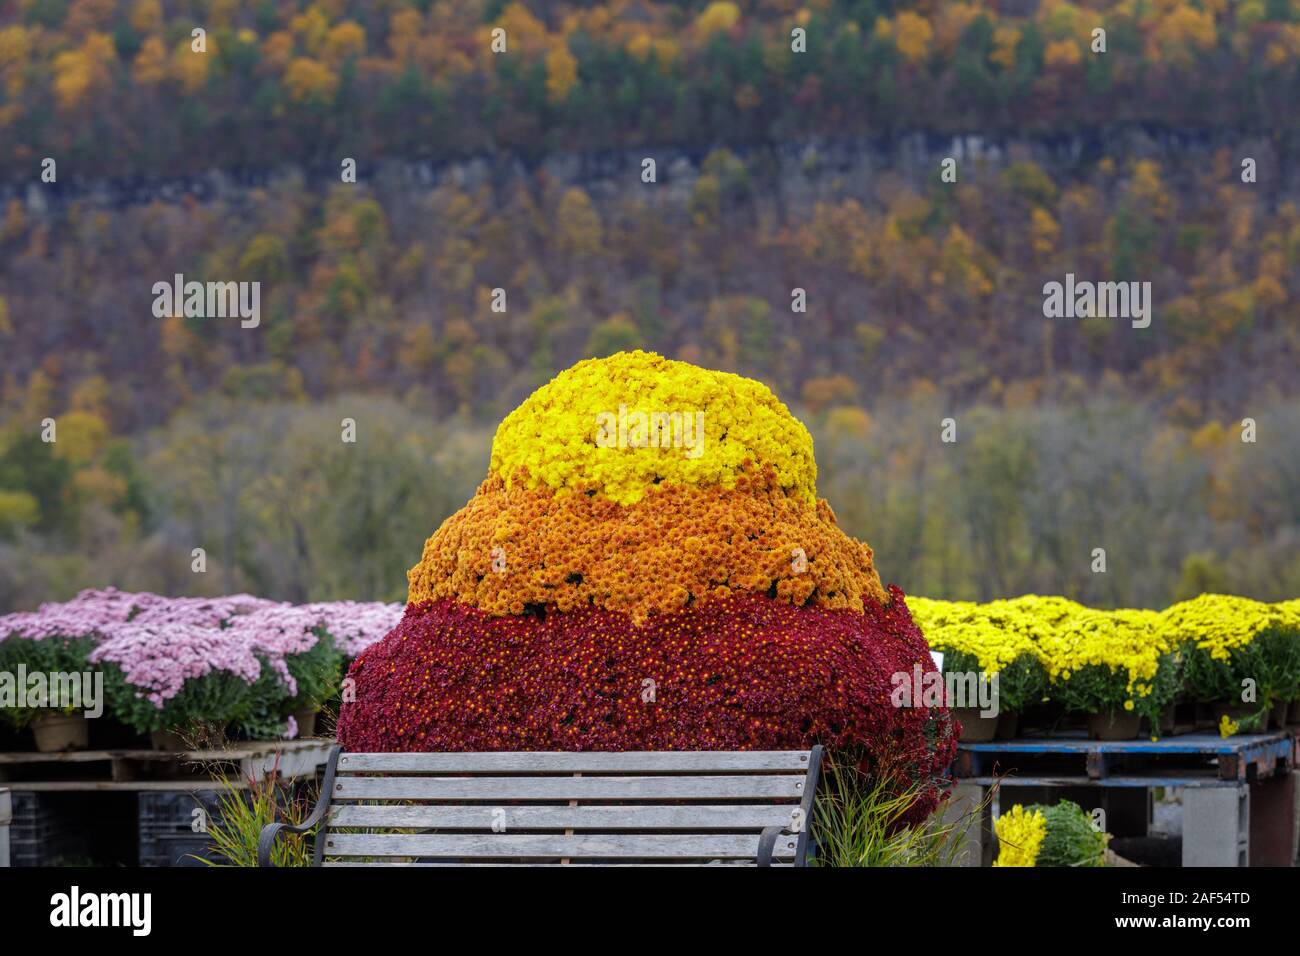 Schoharie, New York: Chrysanthemum display at a popular farm stand called The Carrot Barn. Stock Photo